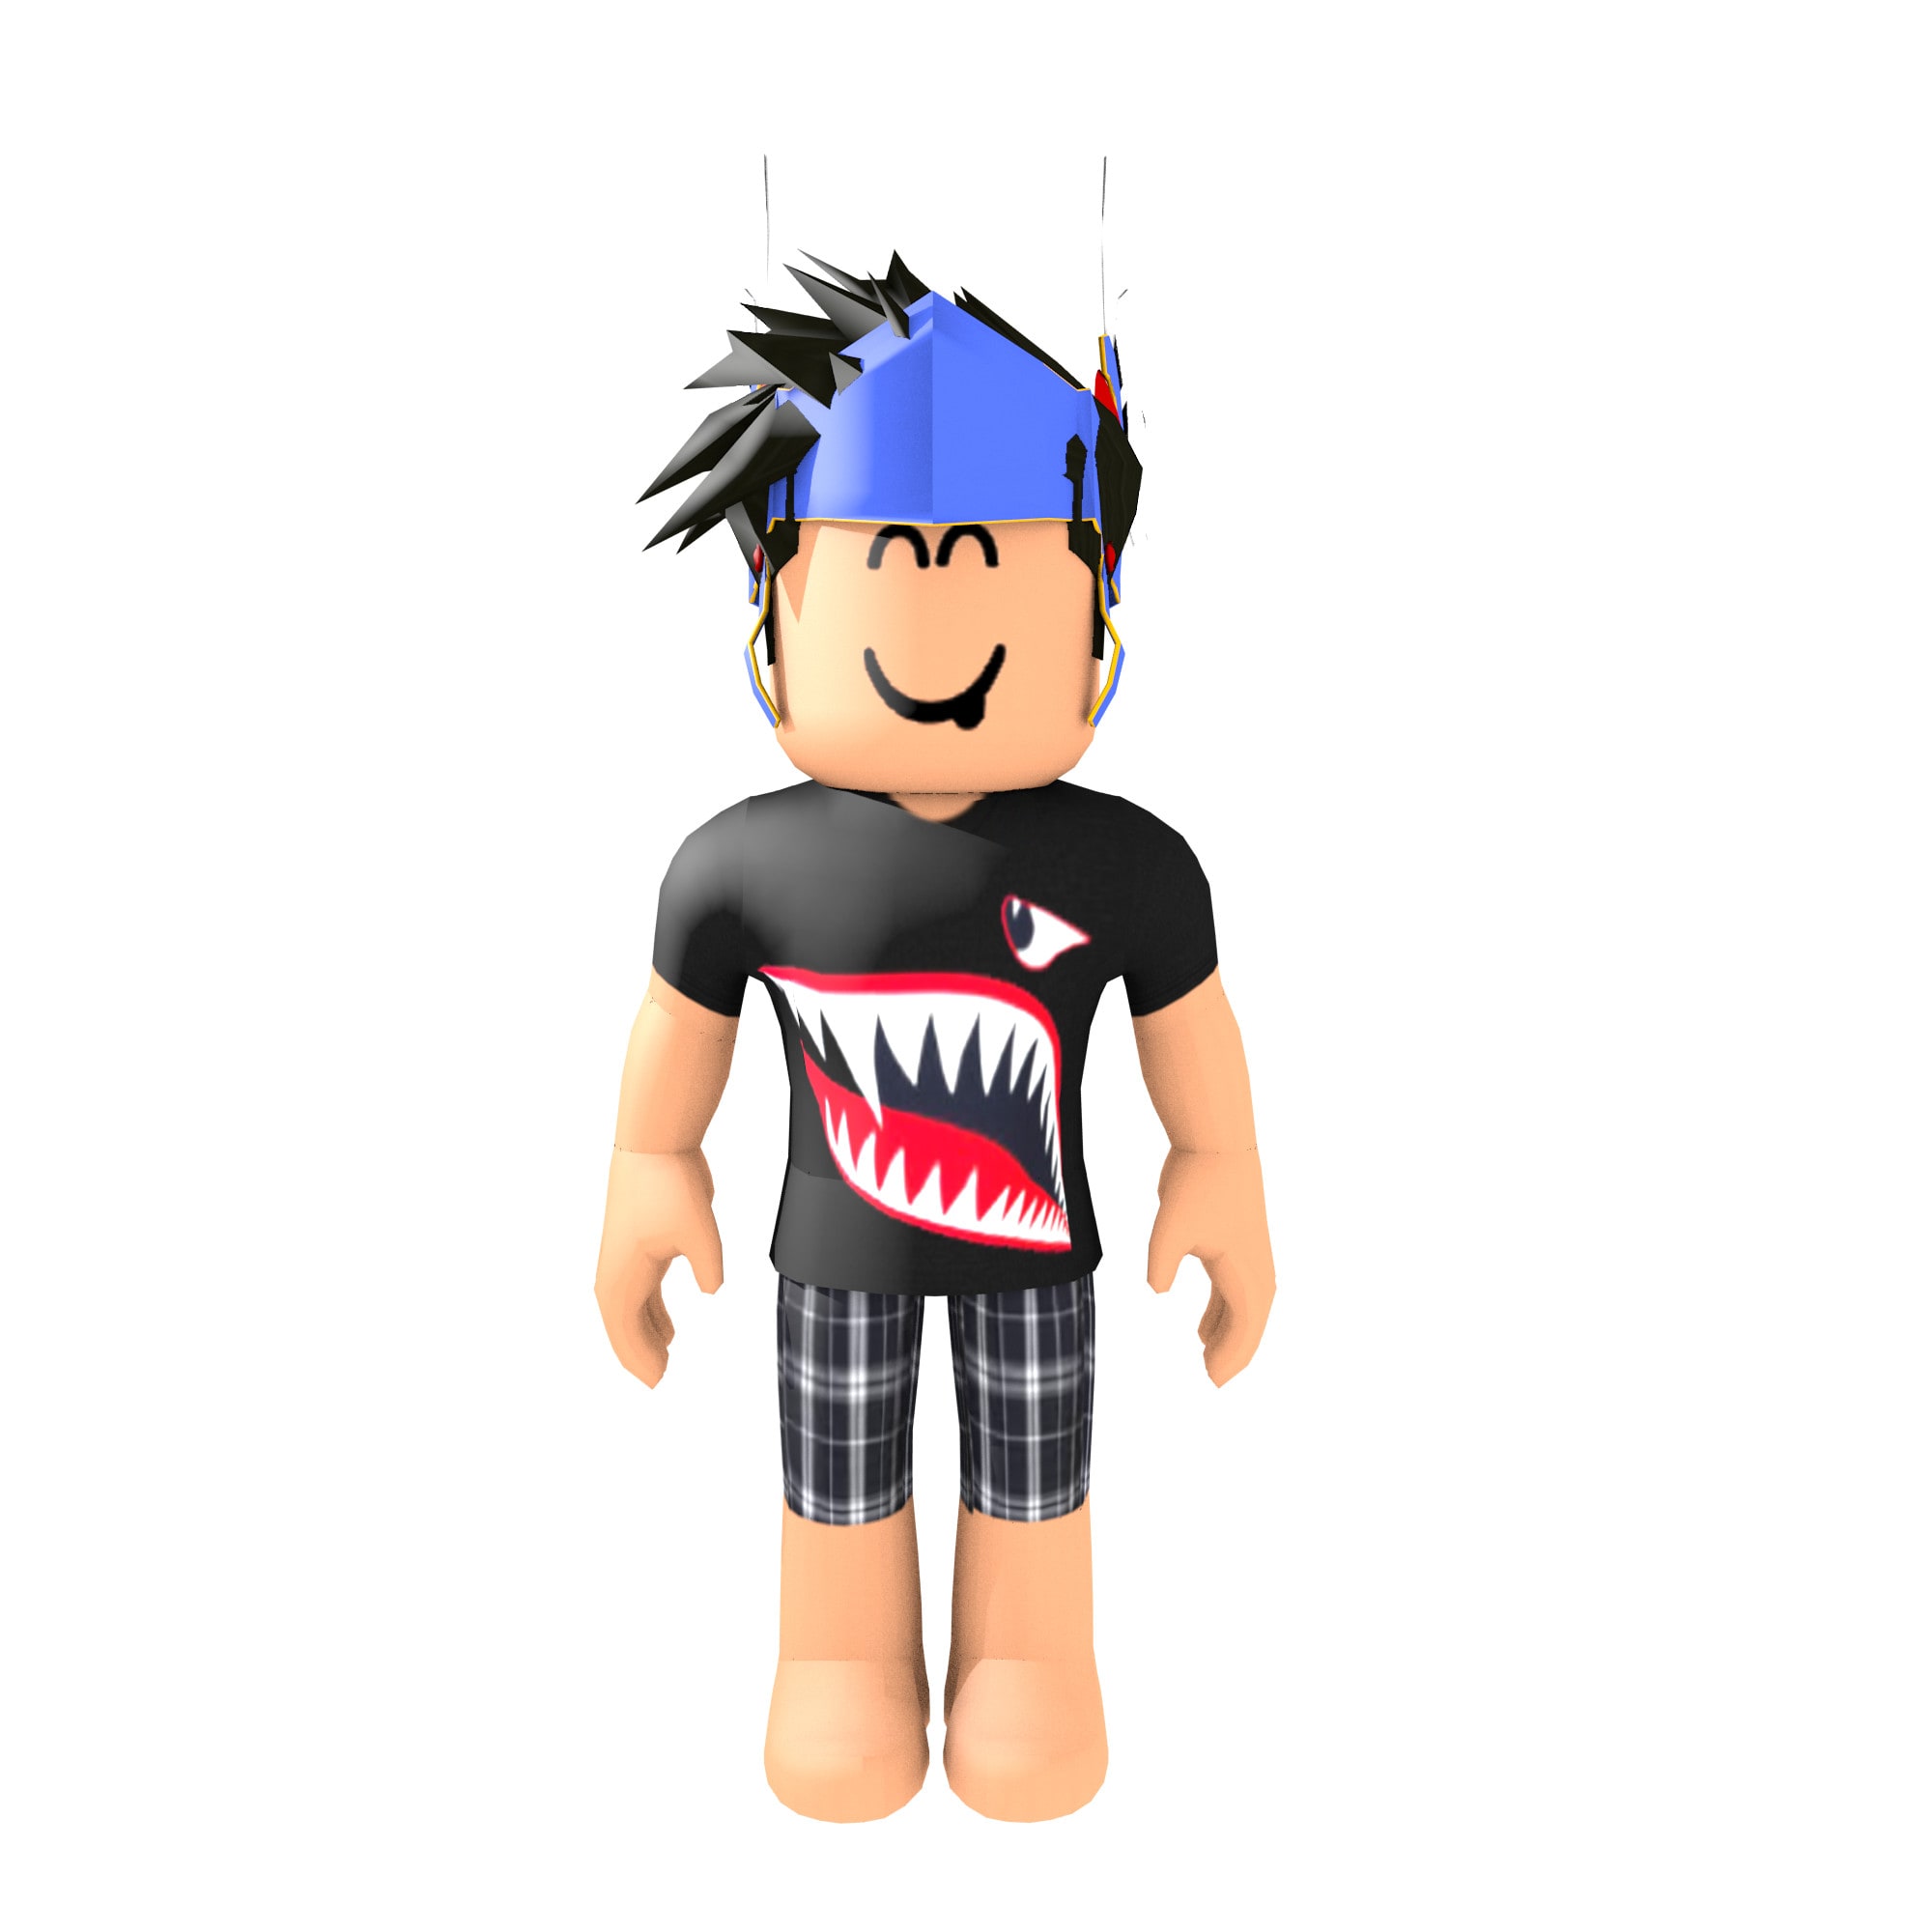 Basic Boy Roblox Render! by Pipxal on DeviantArt